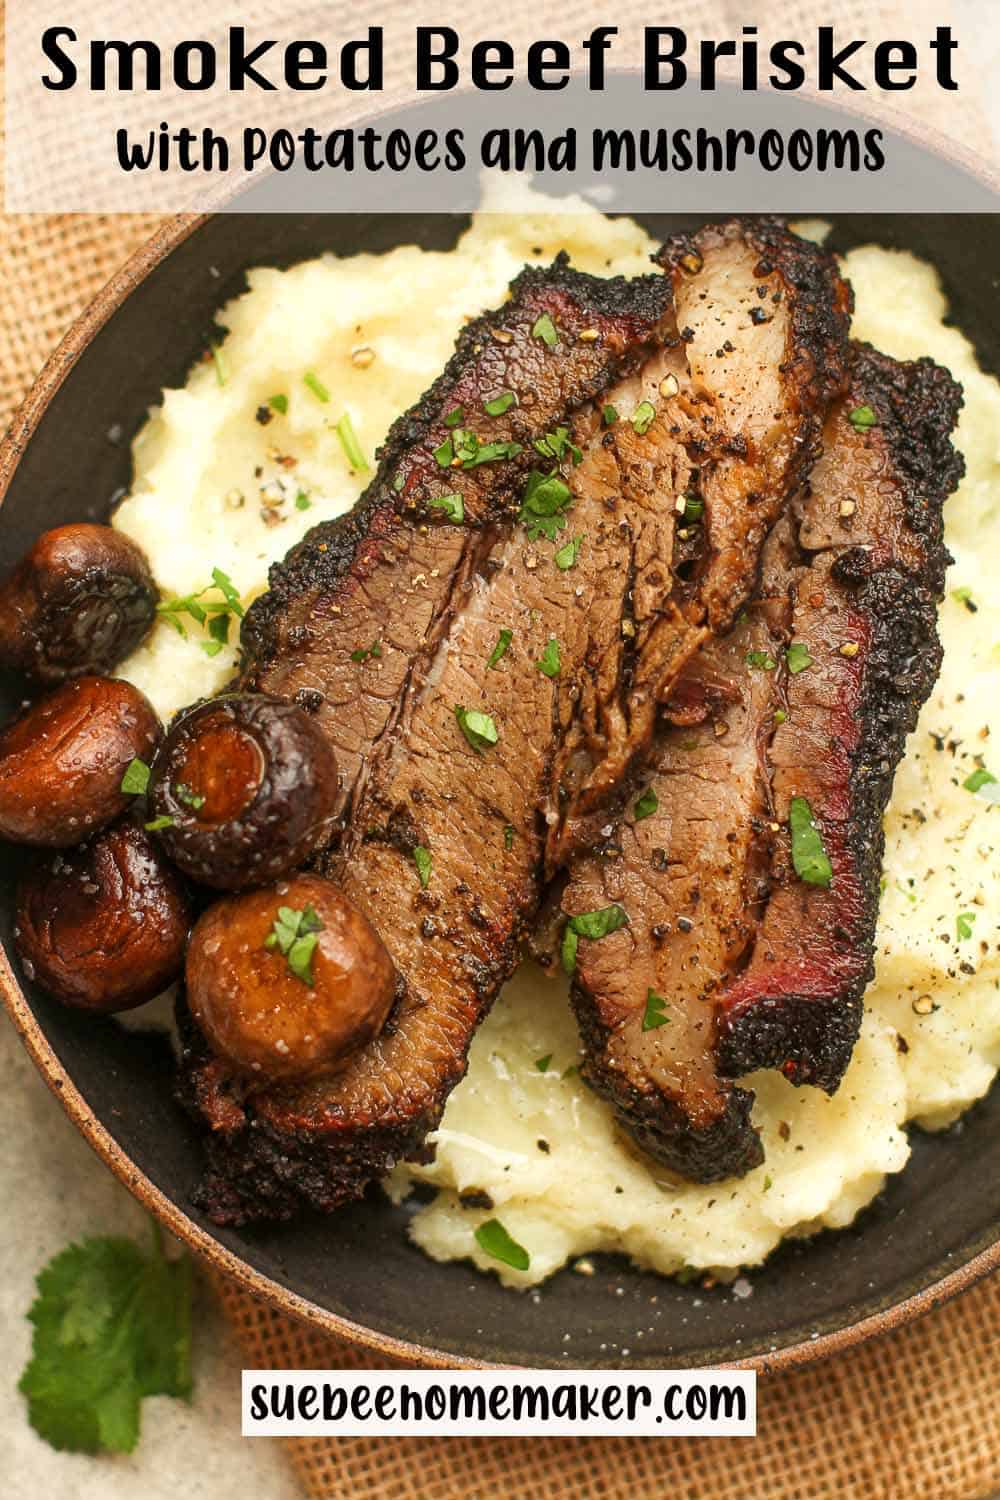 A bowl of fall-apart brisket with mashed potatoes